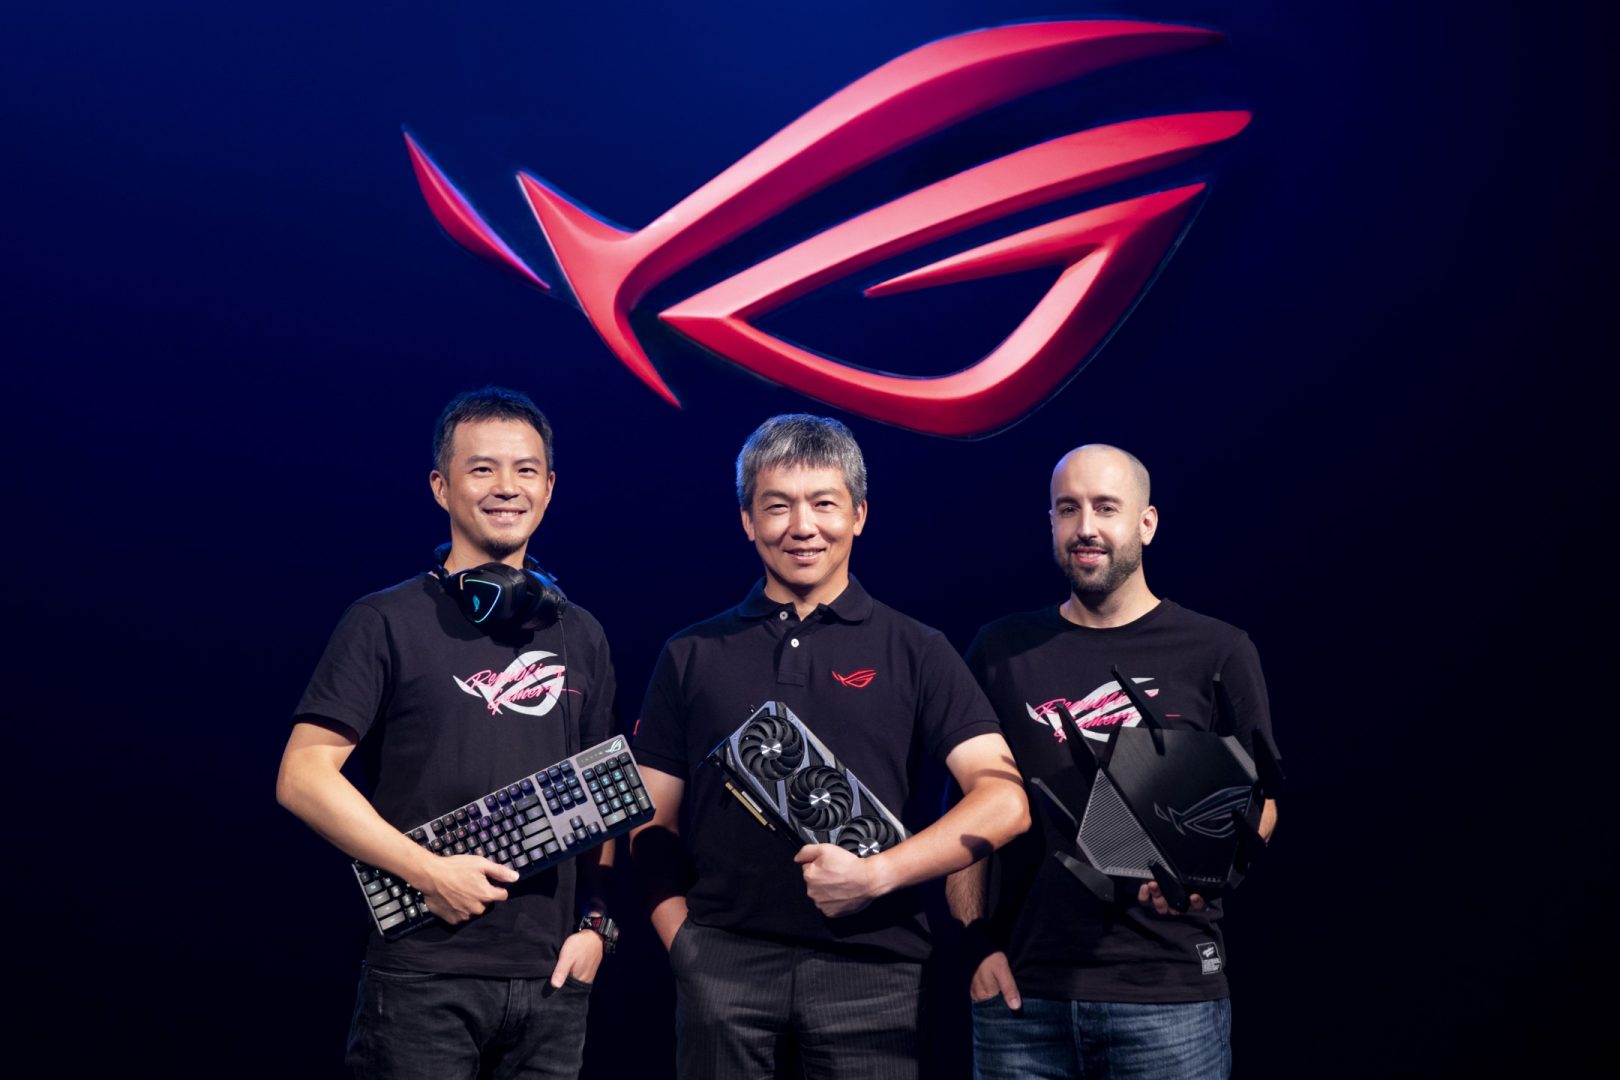 ROG-Announces-Meta-Buffs-Lineup-for-Leveling-Up-Gaming-Experiences-1620x1080.jpg